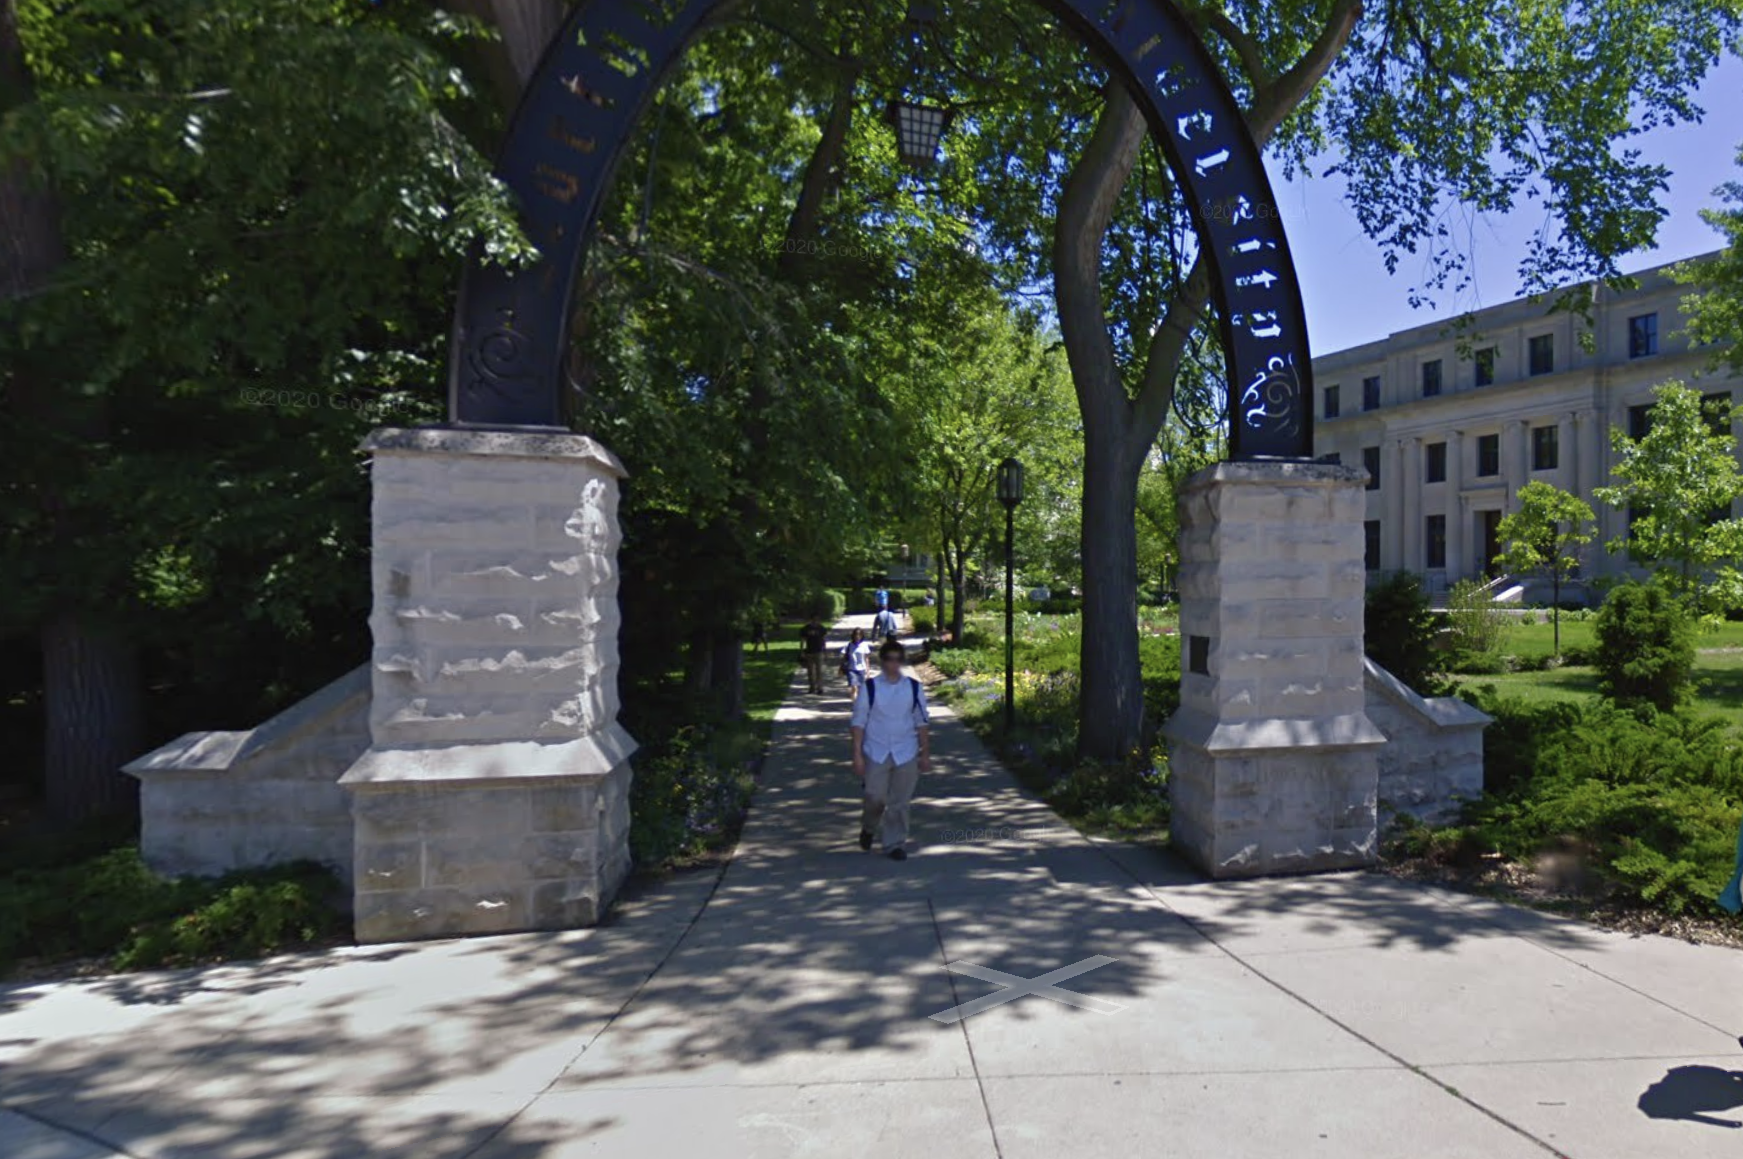 Image of the Arch from Google Maps.